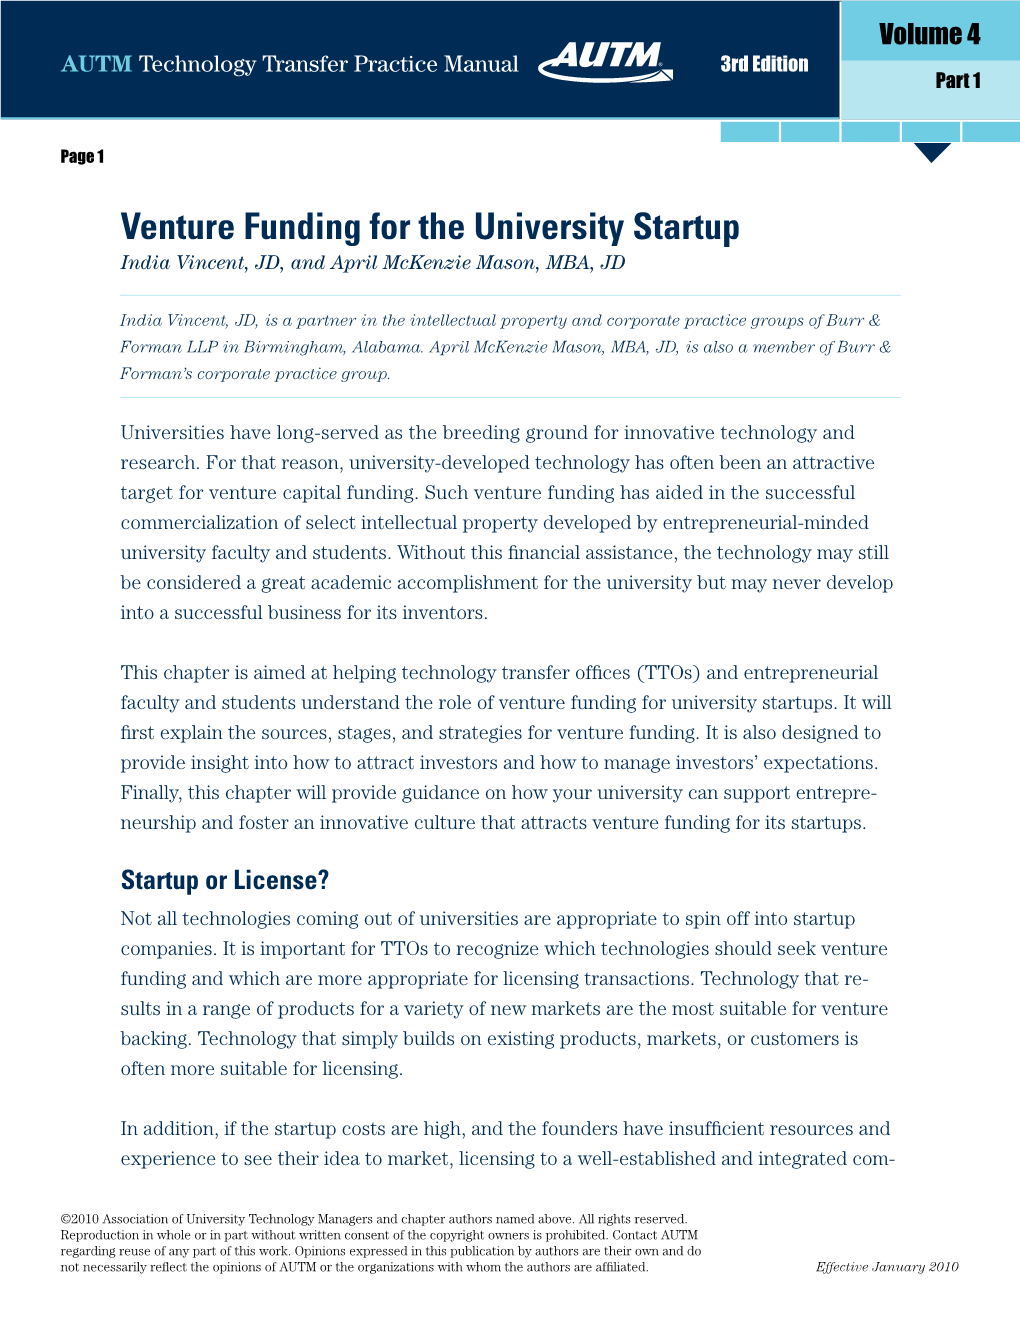 Venture Funding for the University Startup India Vincent, JD, and April Mckenzie Mason, MBA, JD